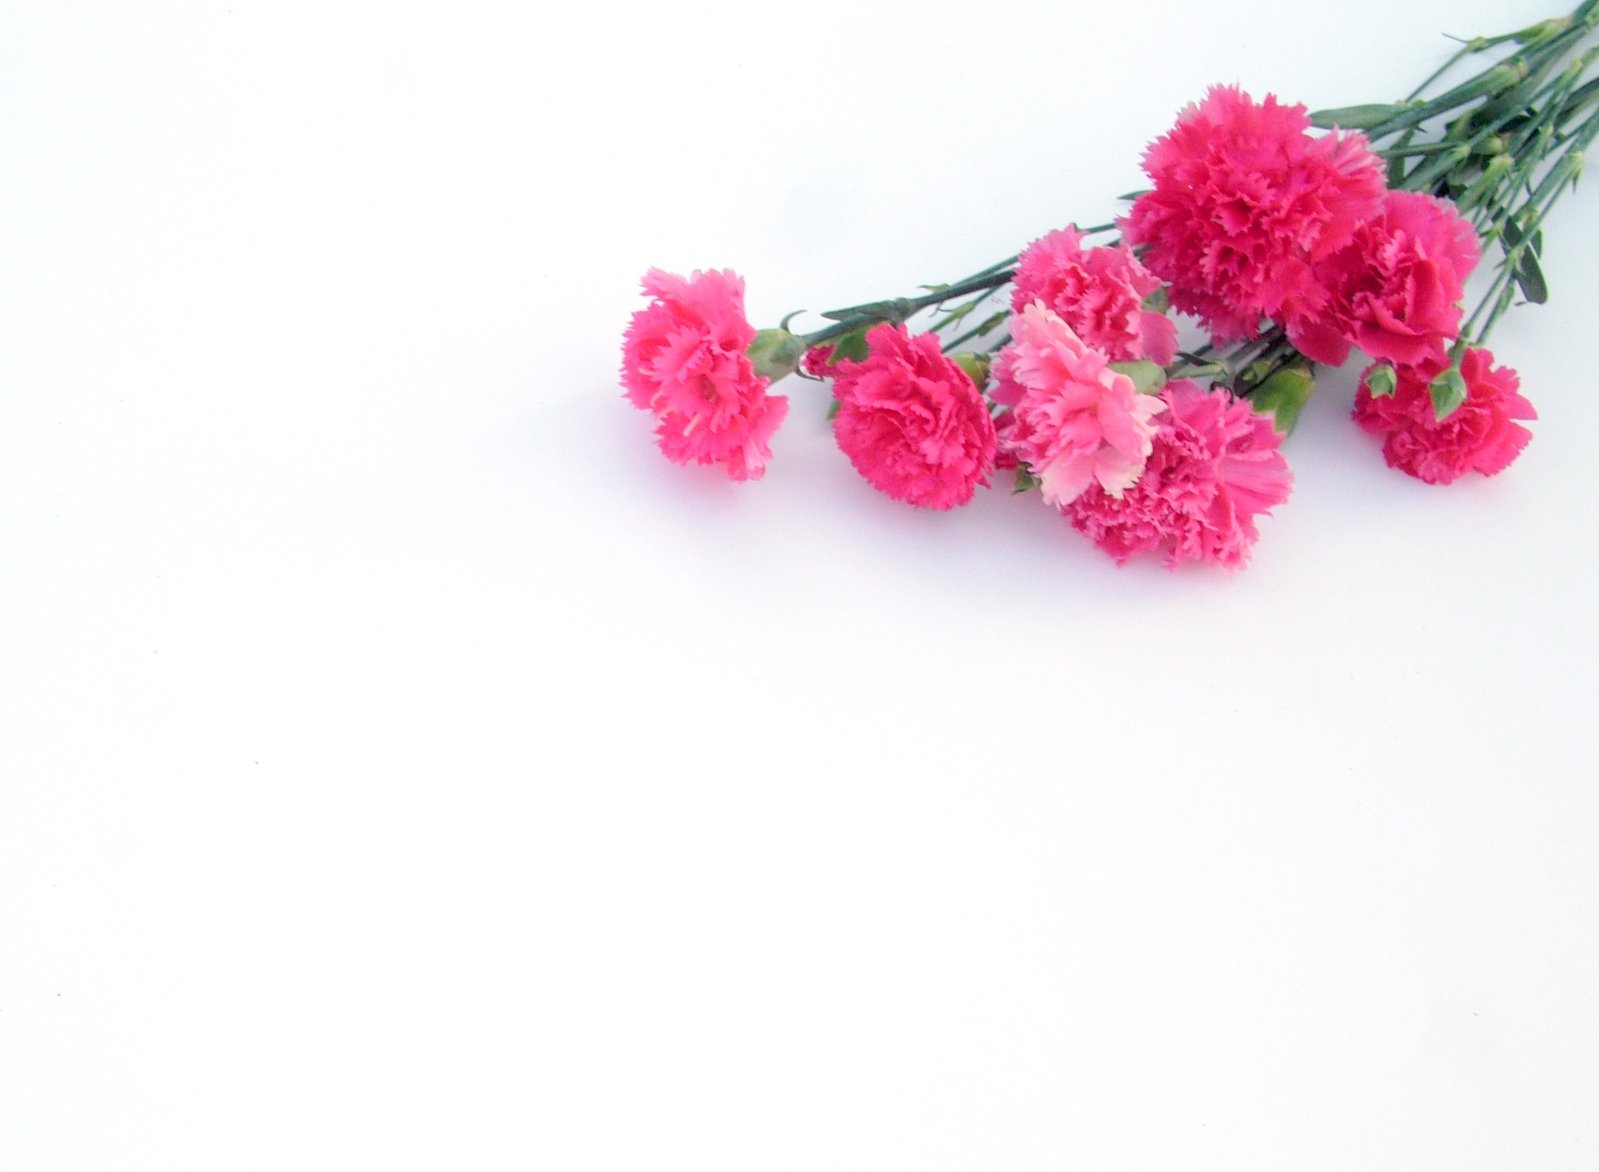 some pink flowers against a white backdrop